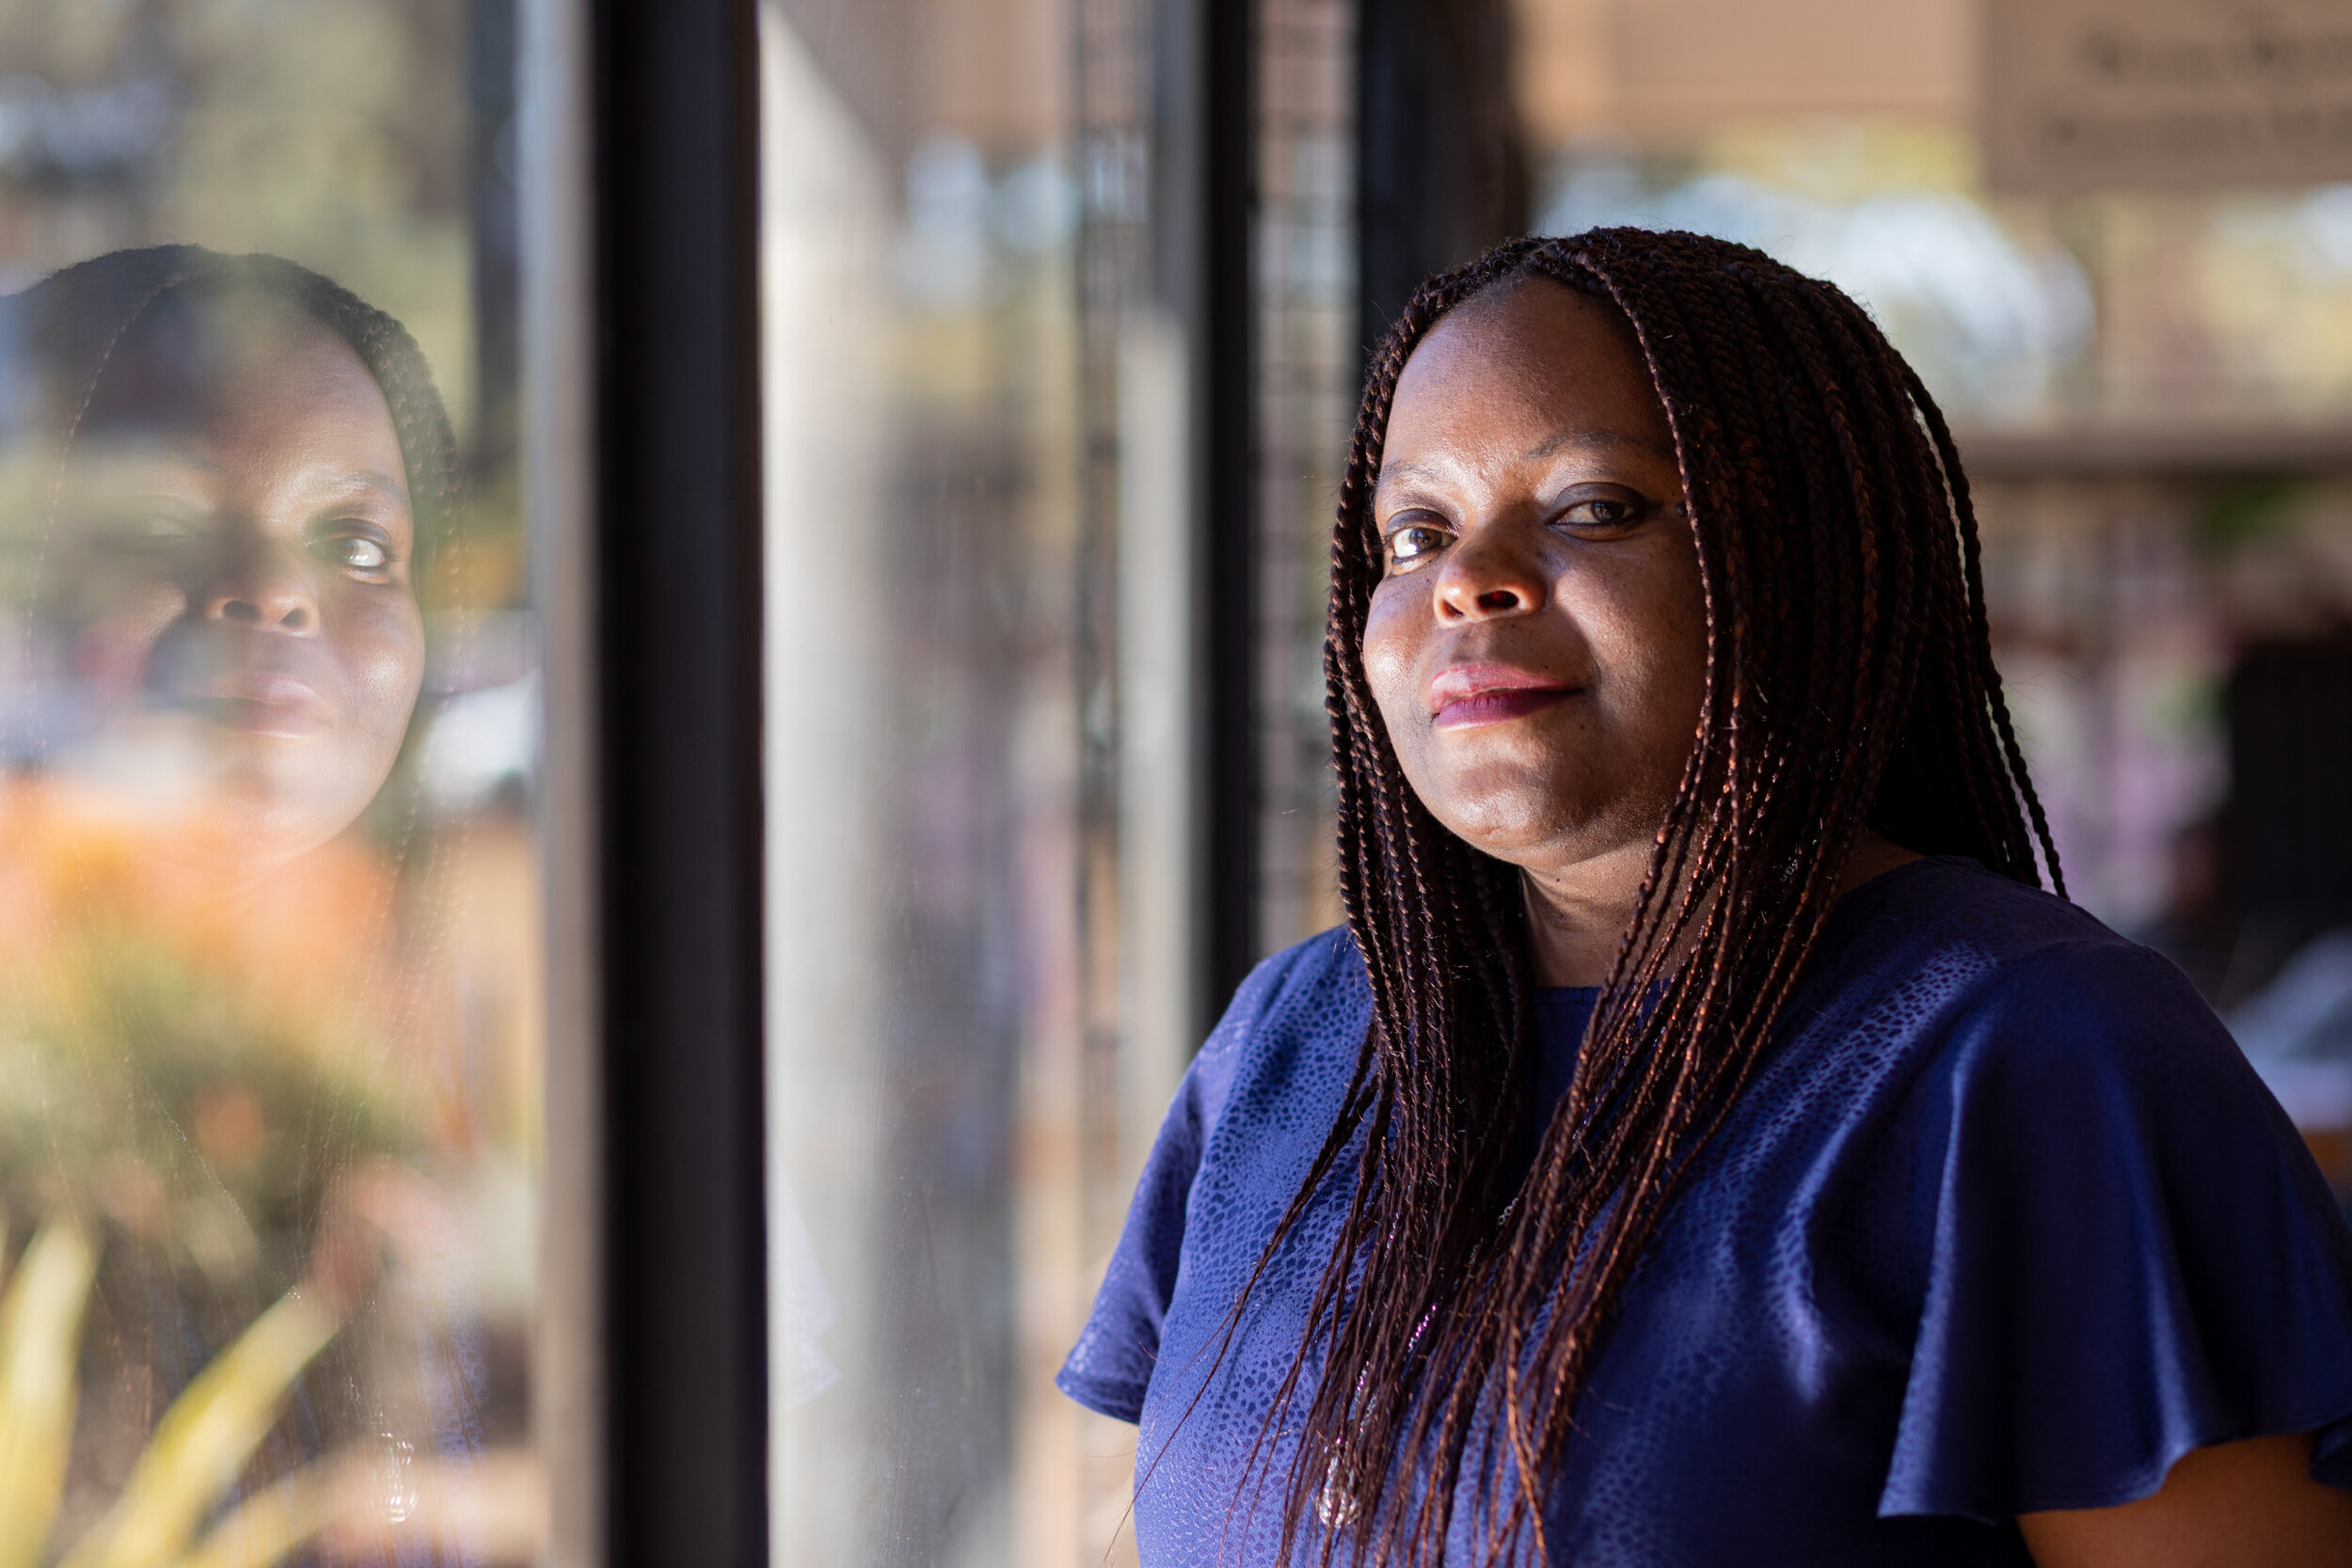  Zimbabwean author Petina Gappah  at Harare City Library.  - For The New York Times  